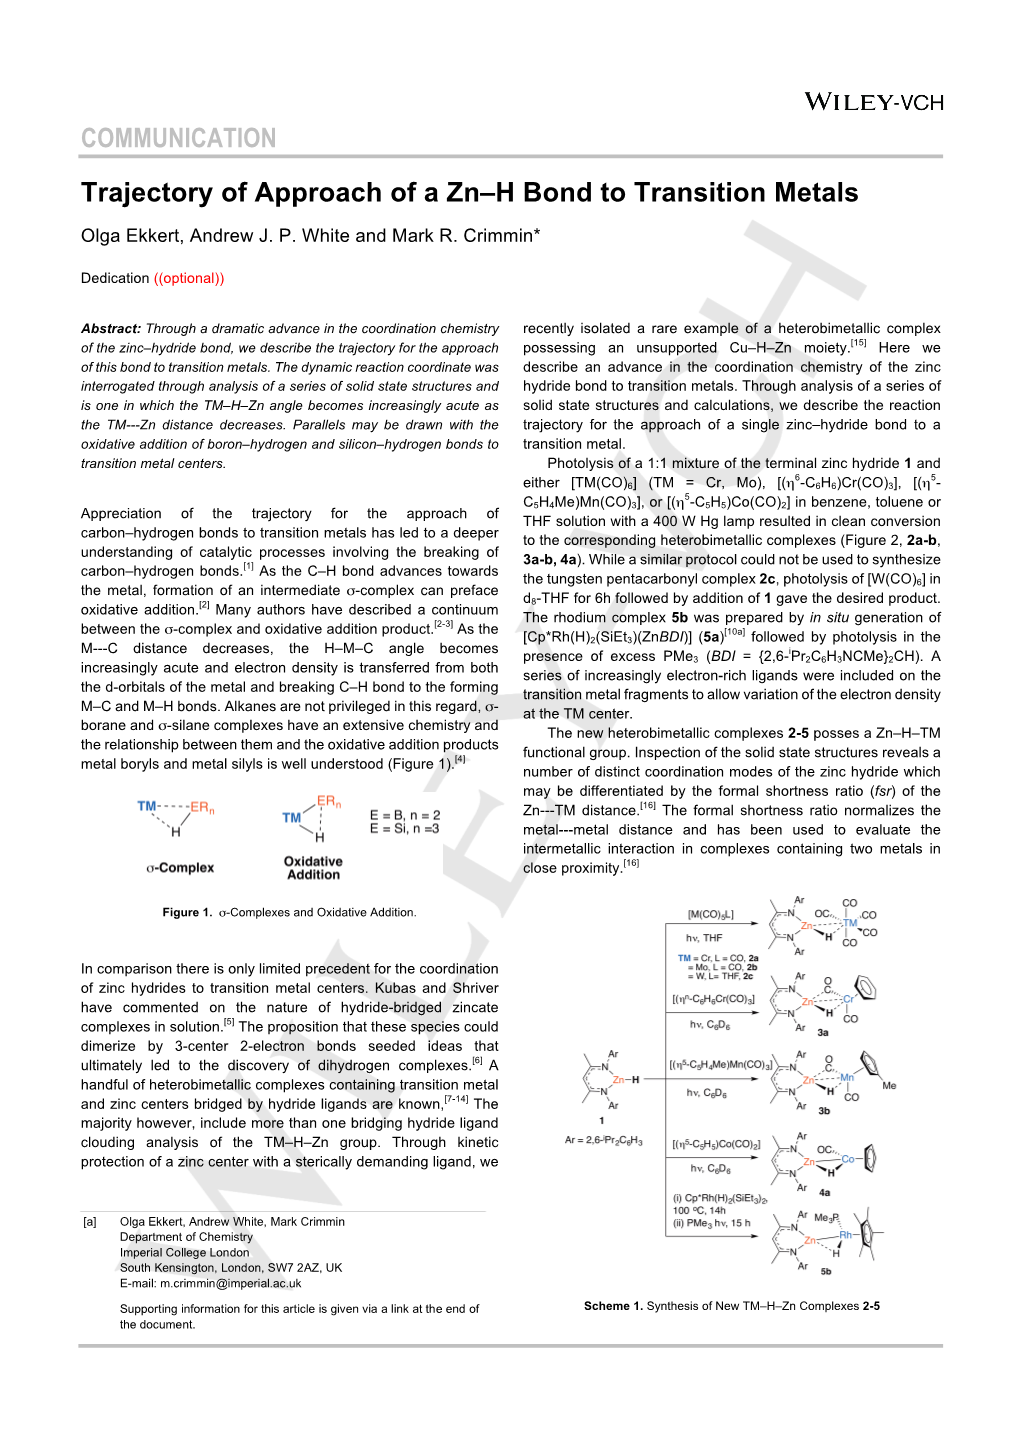 COMMUNICATION Trajectory of Approach of a Zn–H Bond to Transition Metals